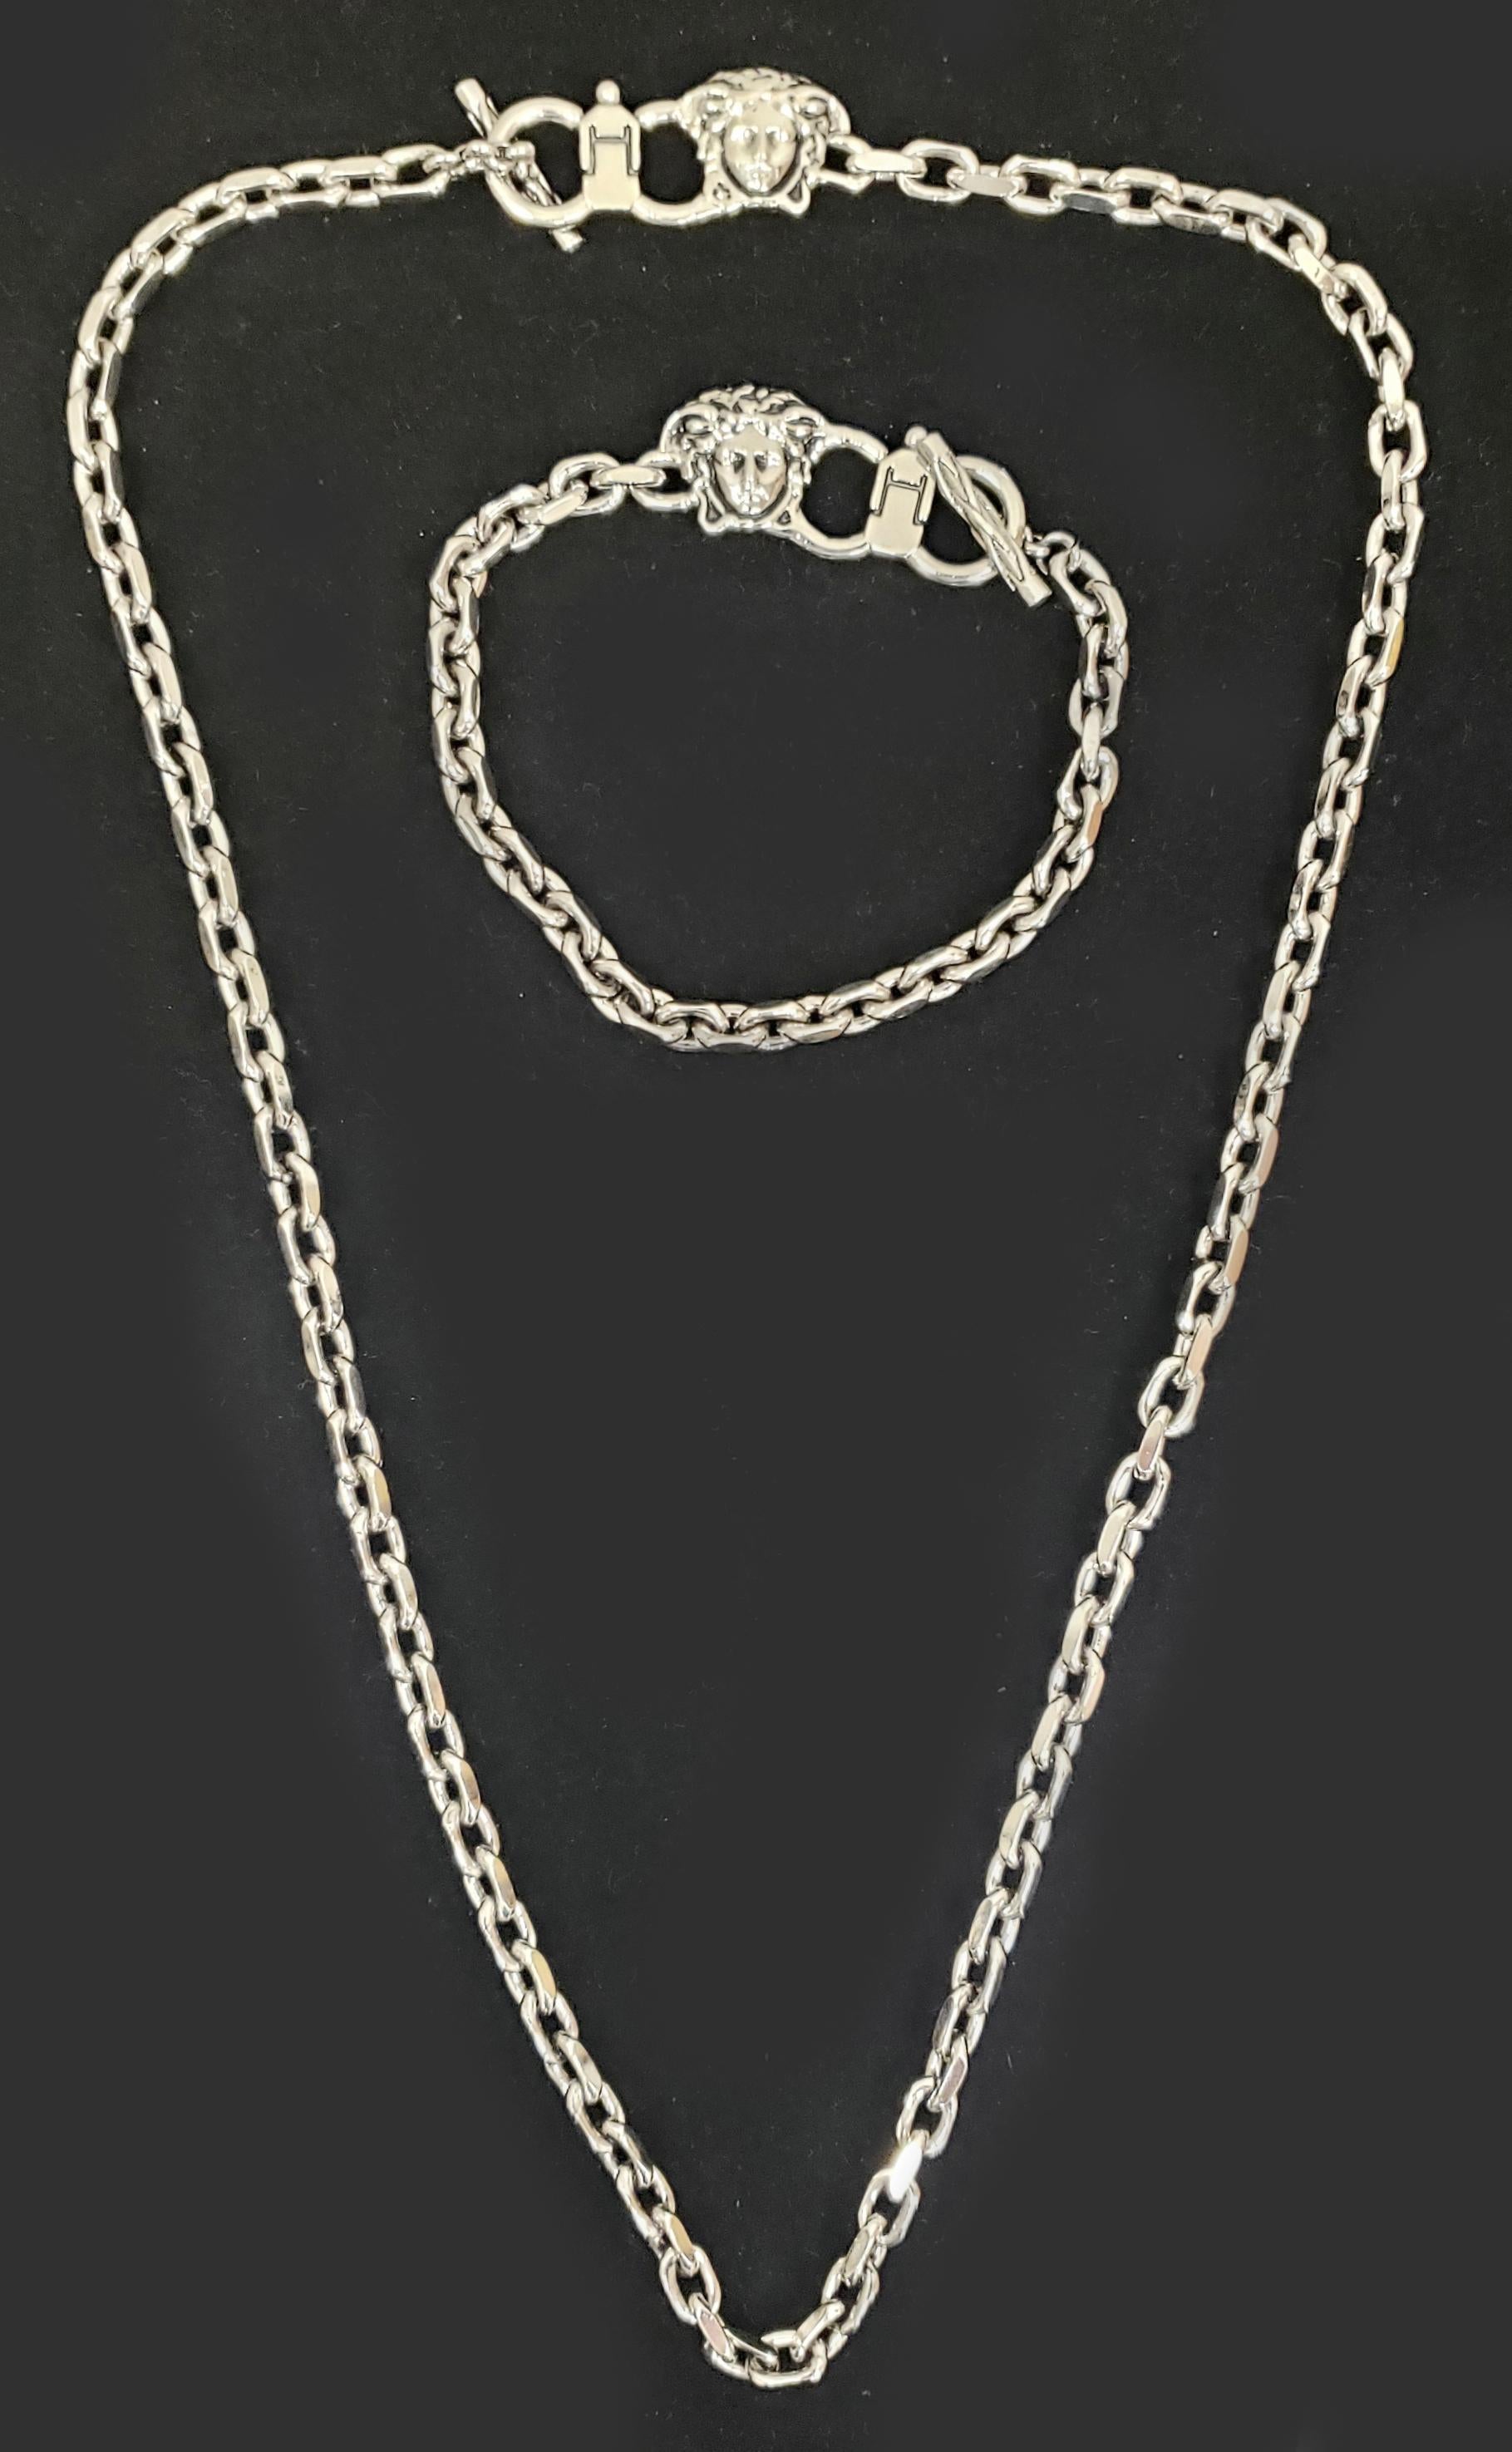   VERSACE
Actual PR-Sample Spring 2011 

     Silver tone Medusa Necklace and Bracelet

Made in Italy



Necklace length 23 1/2